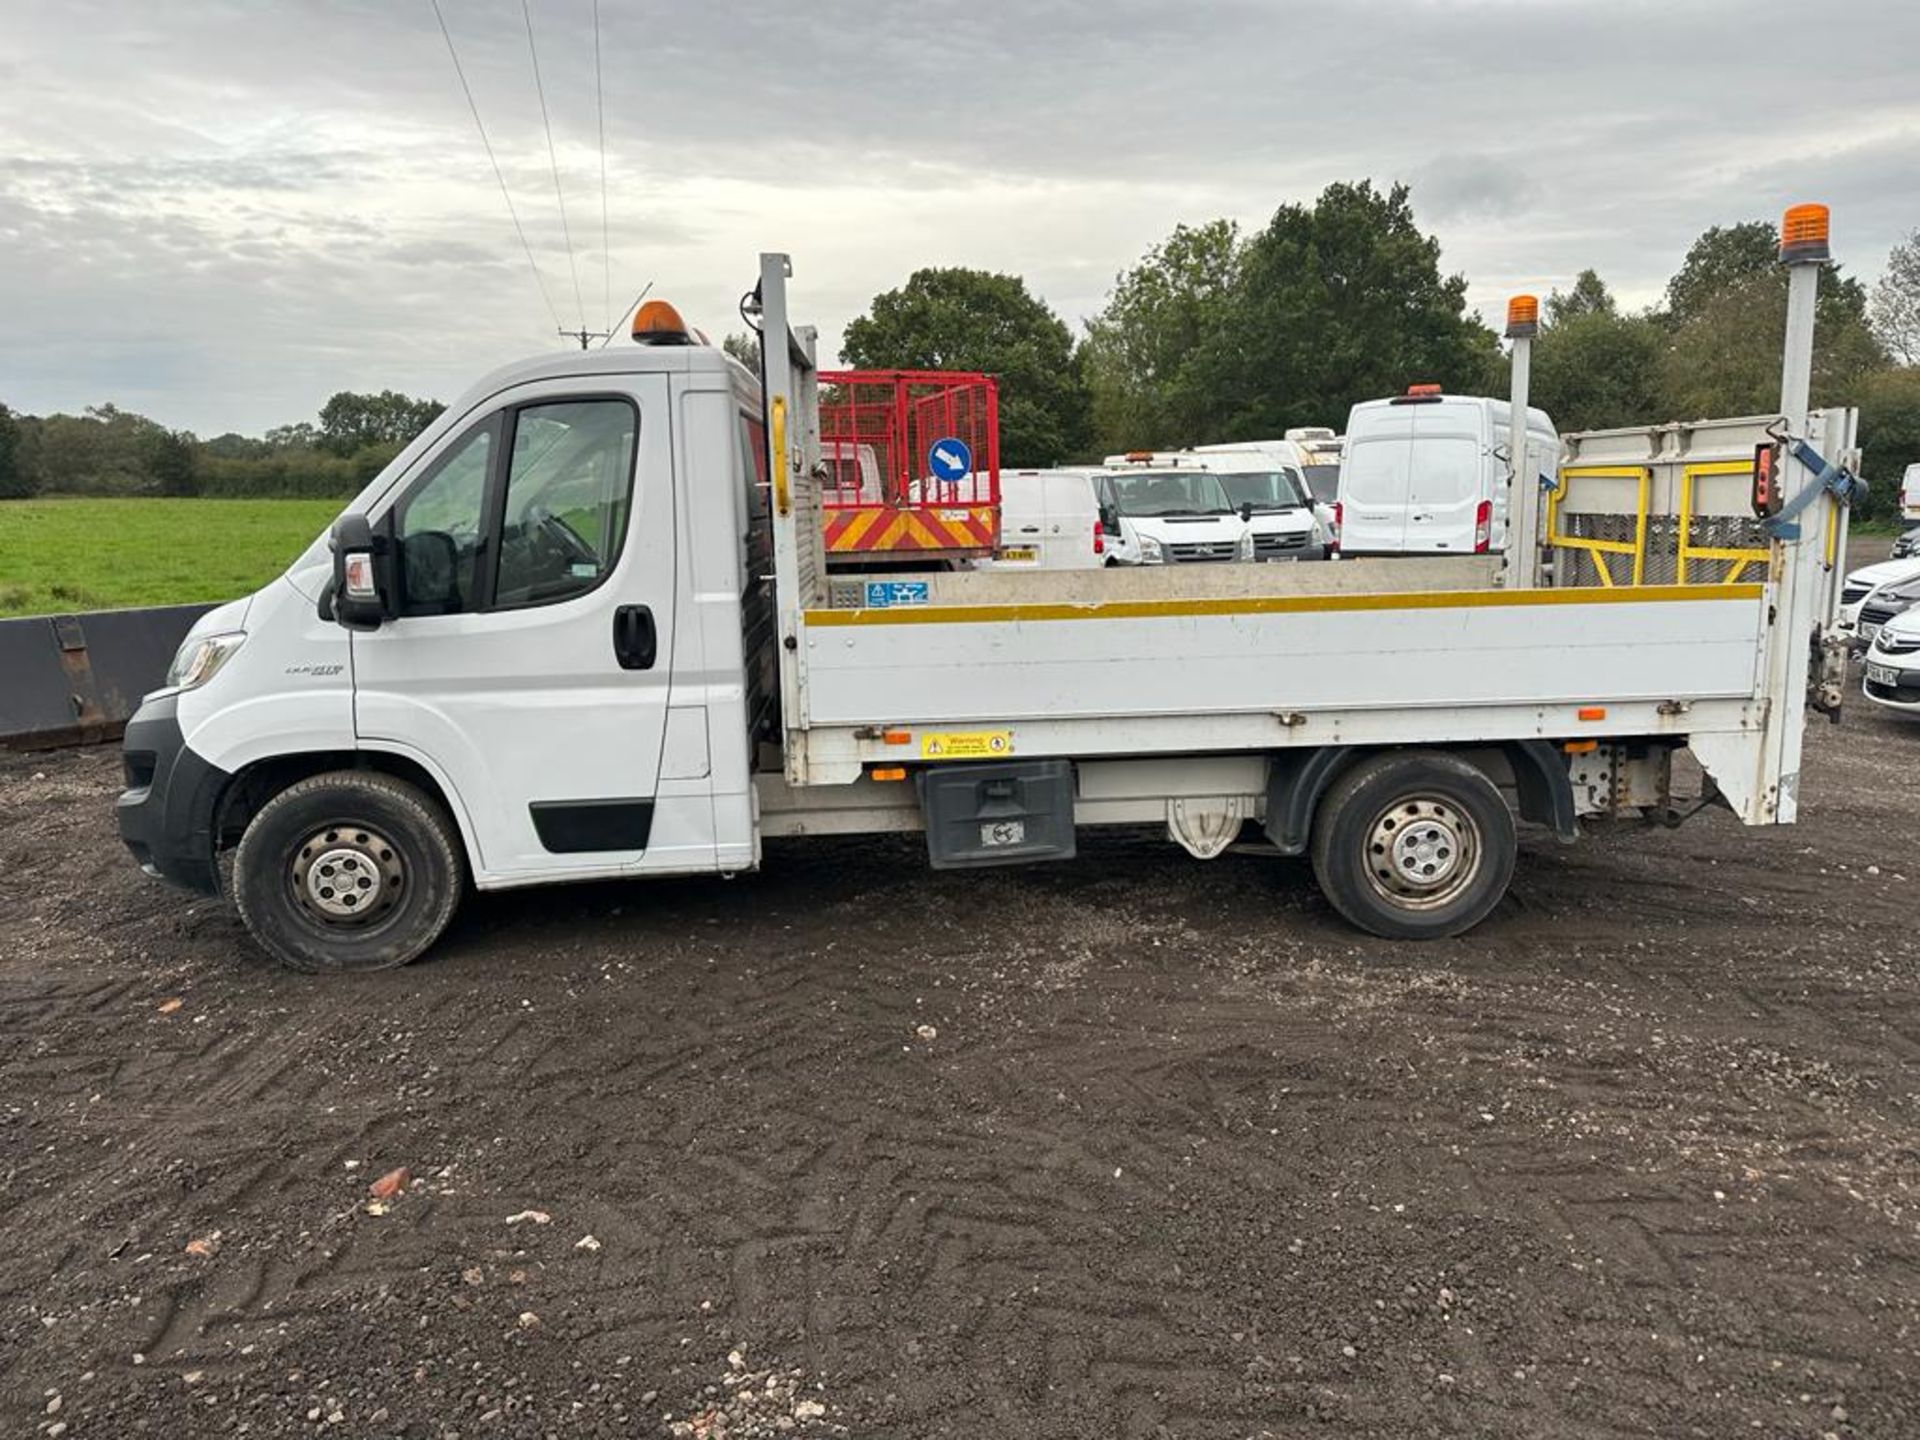 2018 68 FIAT DUCATO DROPSIDE TAIL LIFT - 115K MILES - EURO 6. - Image 7 of 11